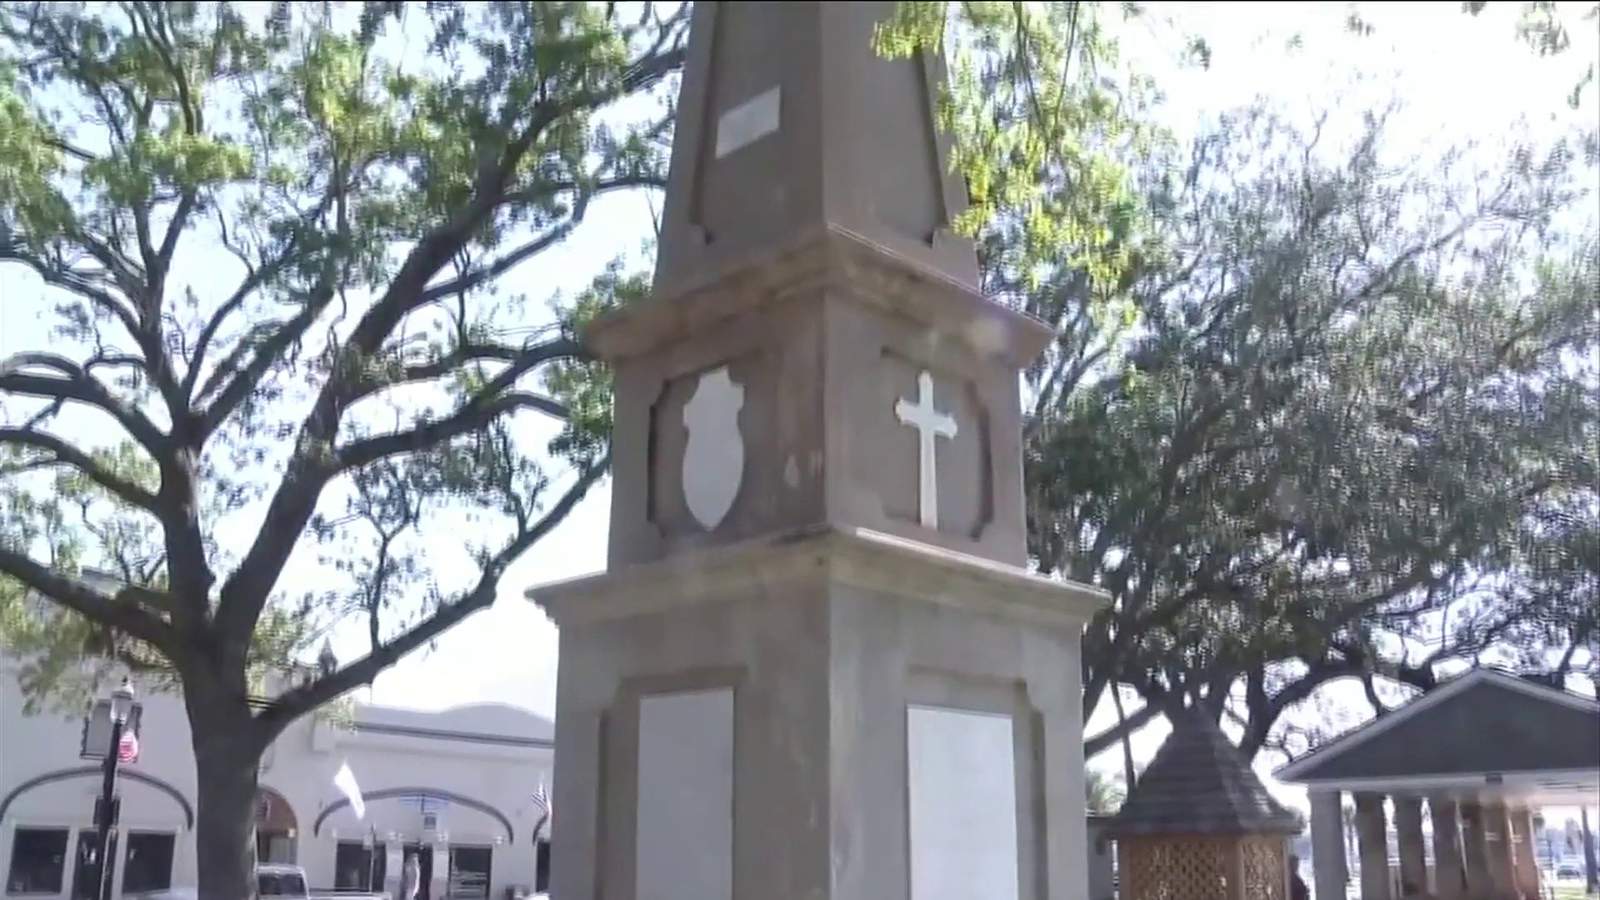 St. Augustine passes motion to move Confederate monument